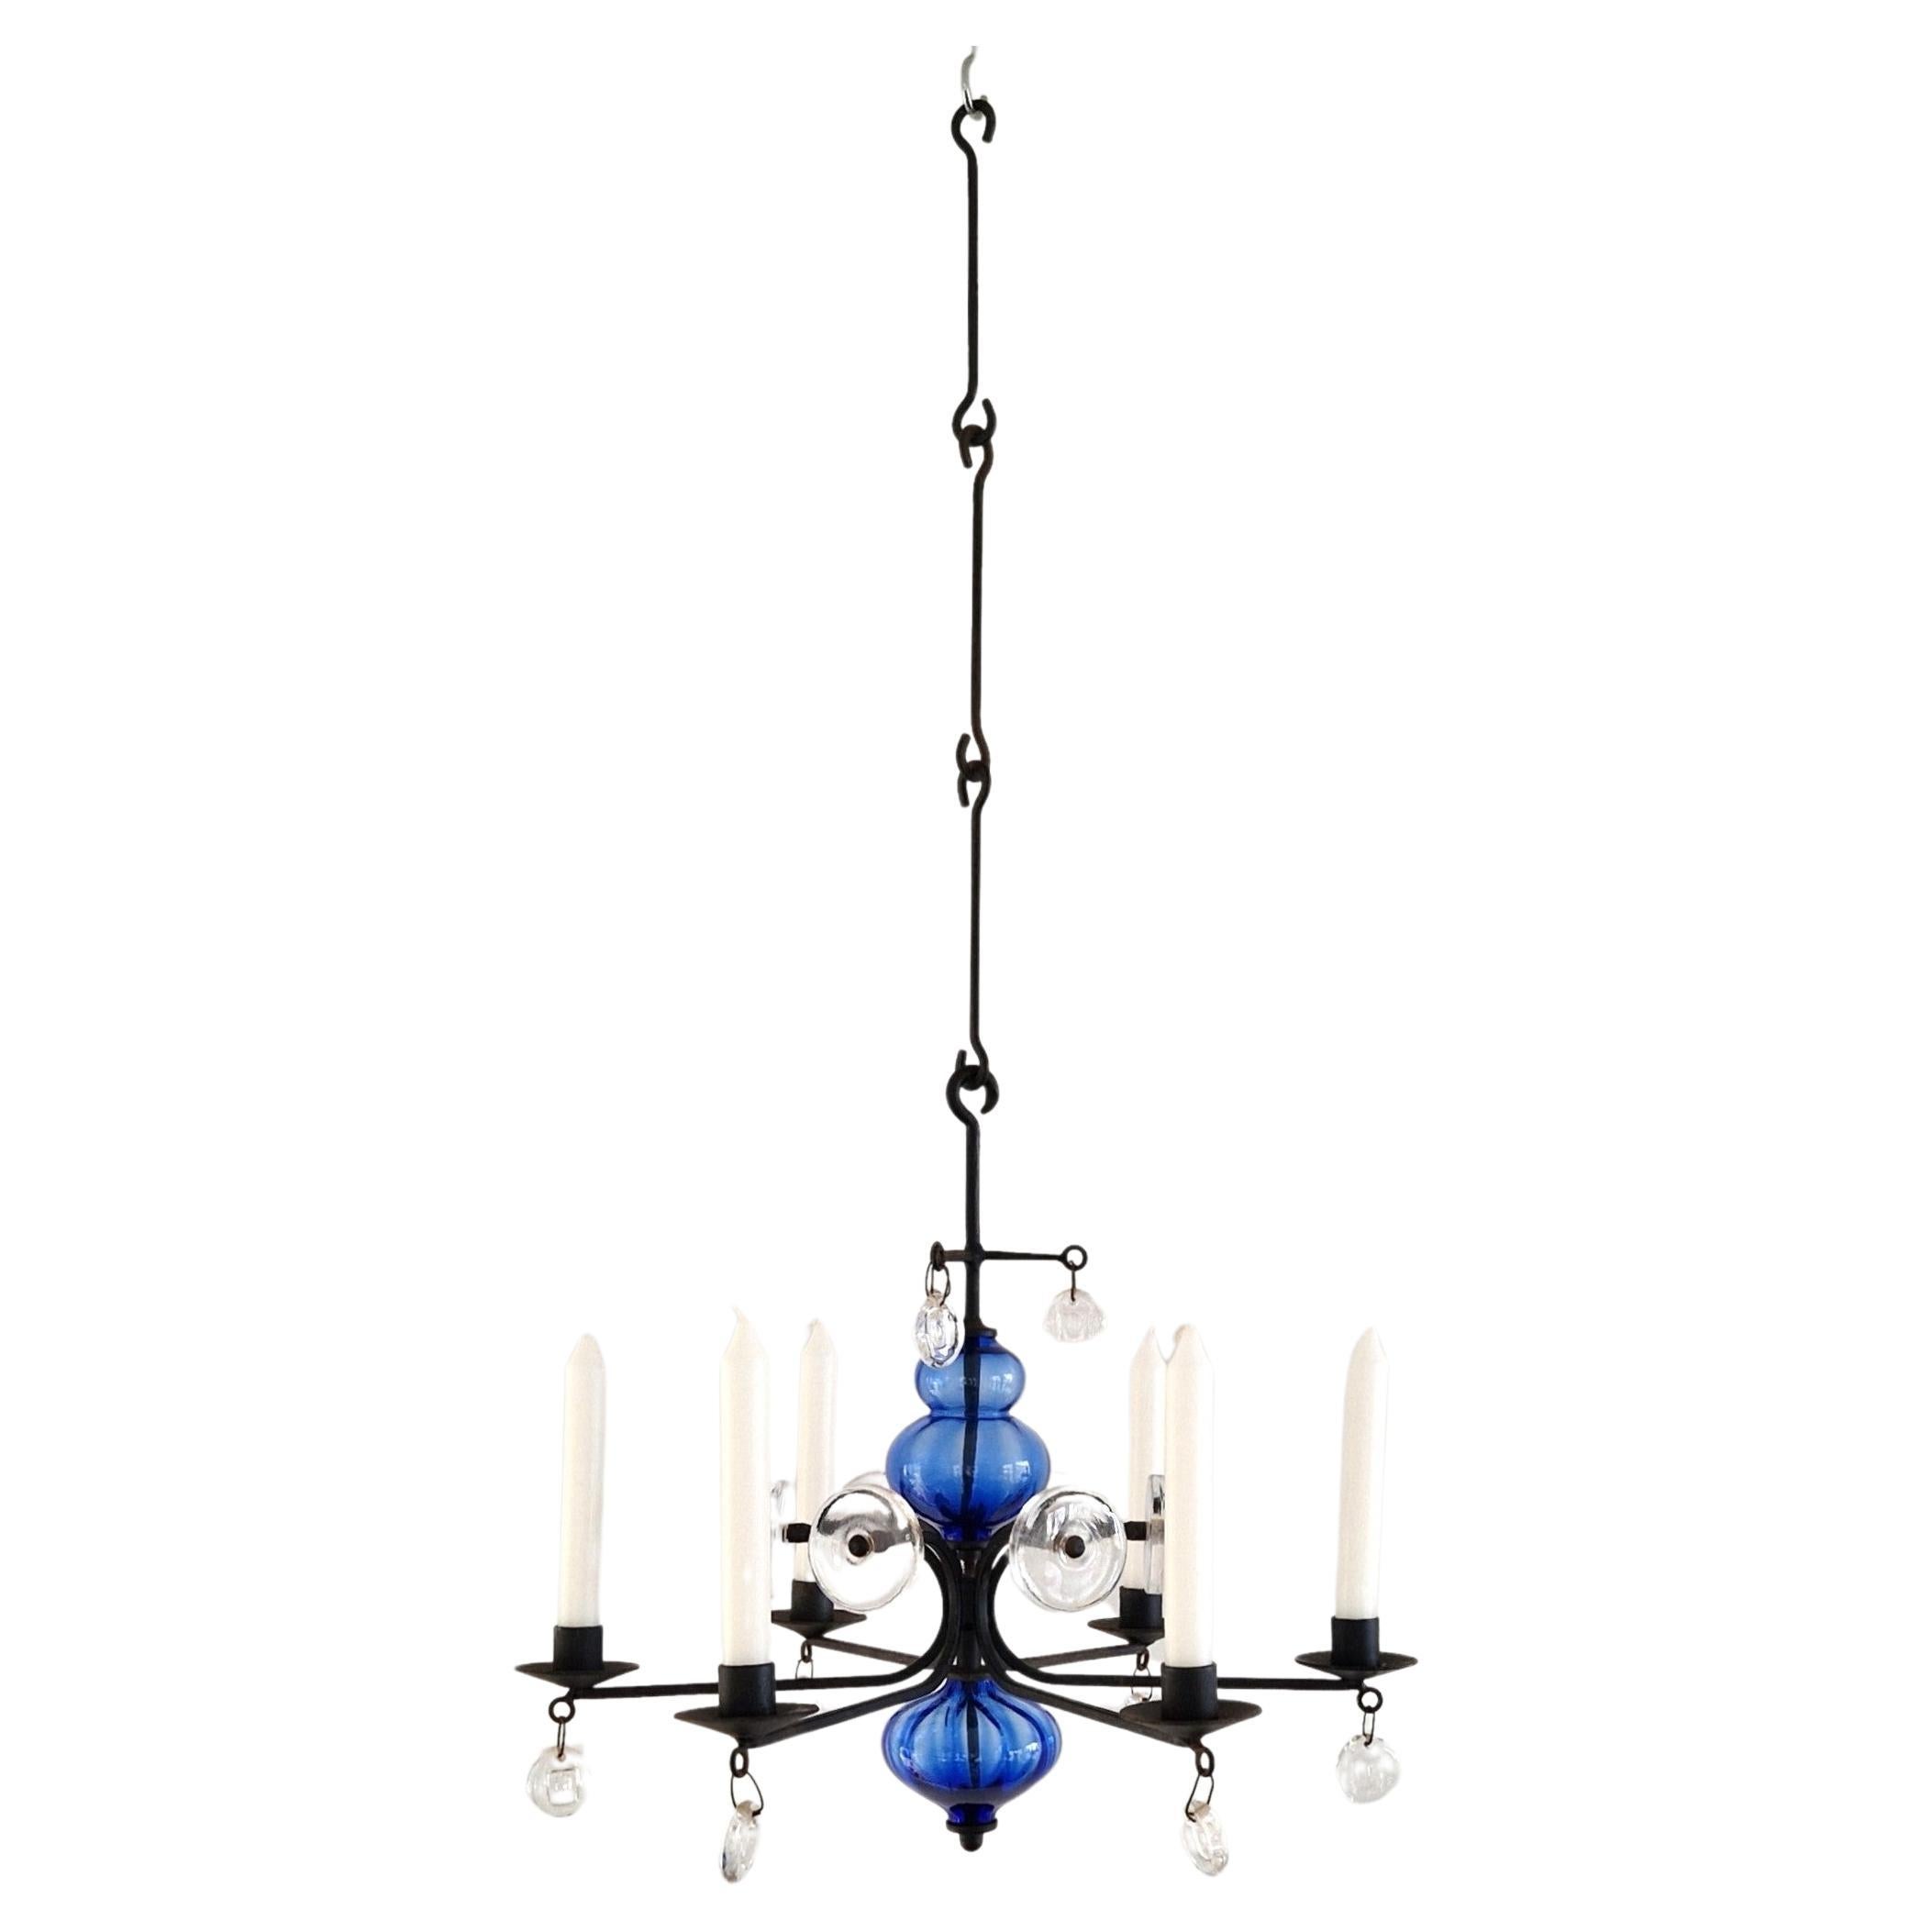 Art glass and wrought iron chandelier by Erik Höglund for Boda, Sweden